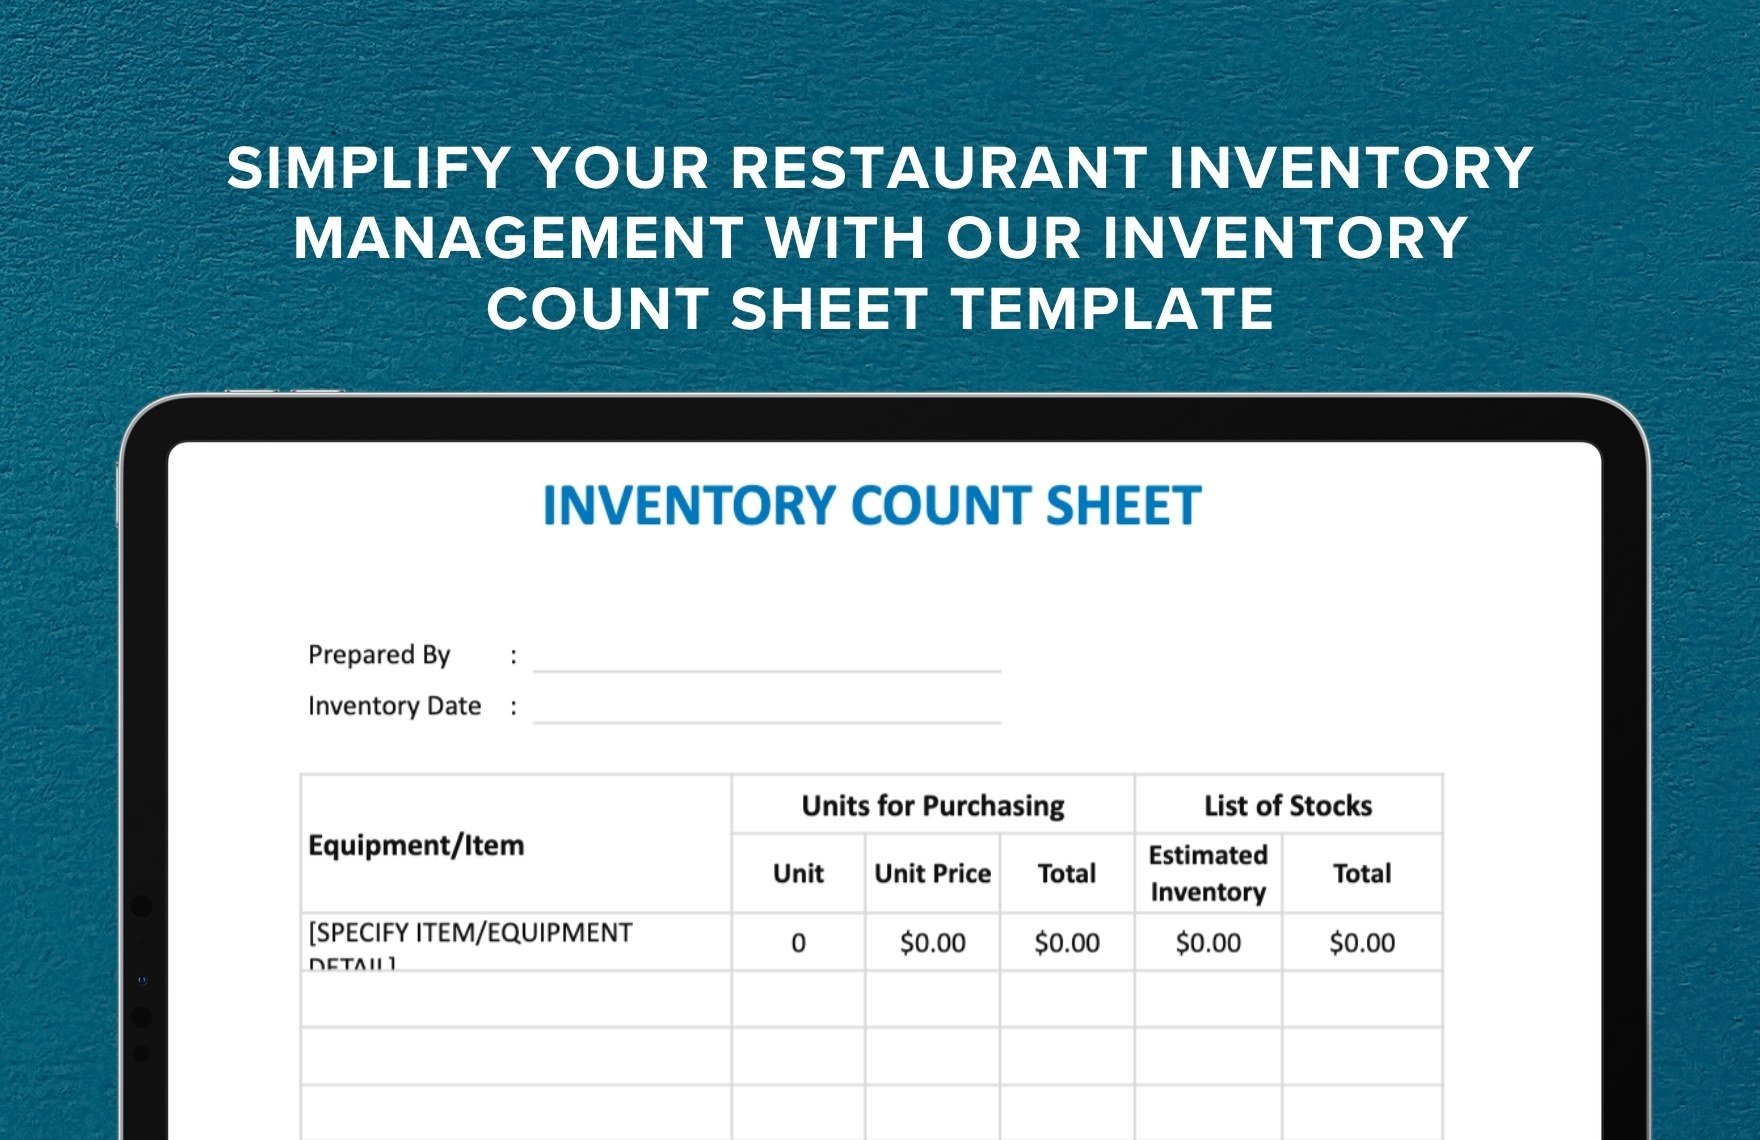 Restaurant Inventory Count Sheet Template